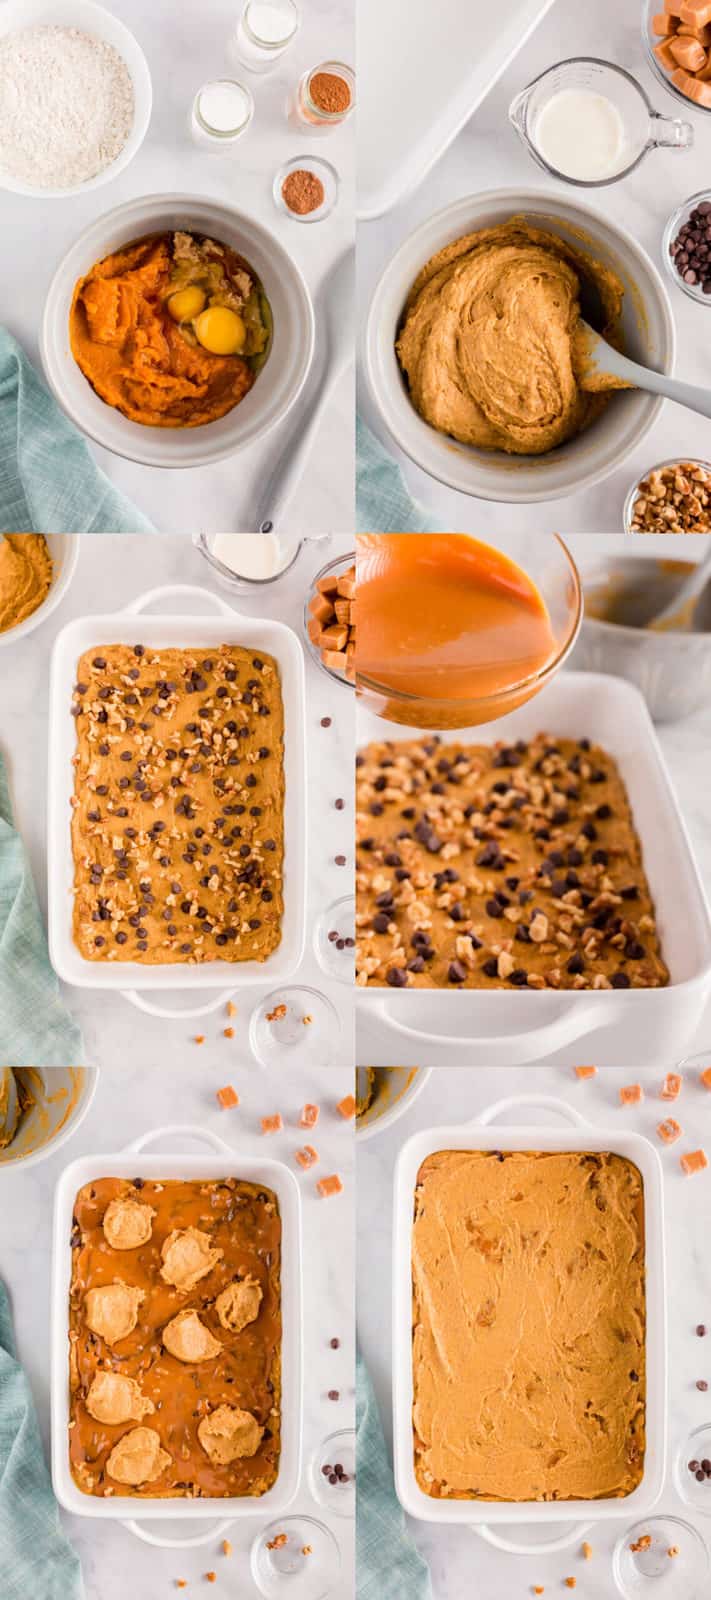 pumpkin blondies wet ingredients in a mixing bowl, pumpkin blondie batter in a bow after mixing. botter in a baking dish with chocolate chips and nuts on top. caramel sauce in a bowl about to be poured over blondie batter, batter paced in dllops over caramel layer, batter spread to cover caramel layer